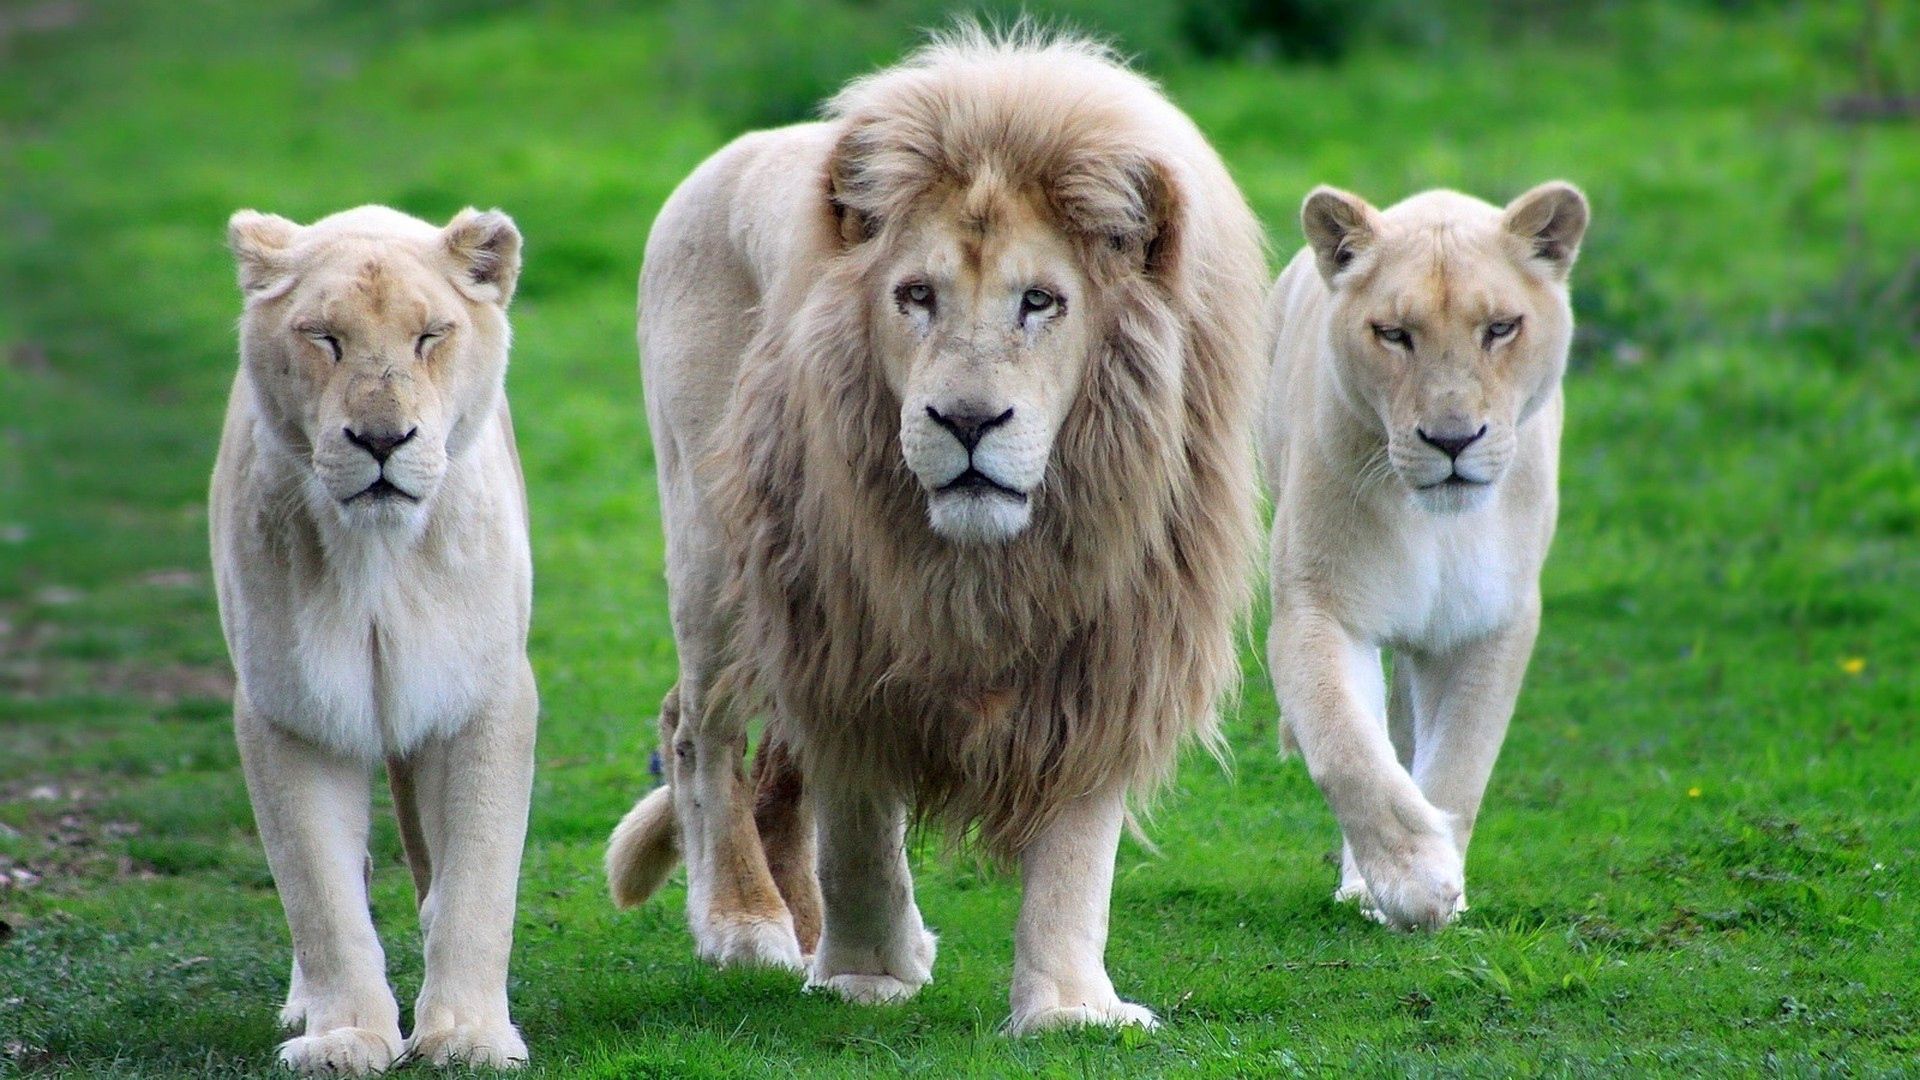 Images & Pictures stroll, grass, animals, lion Family